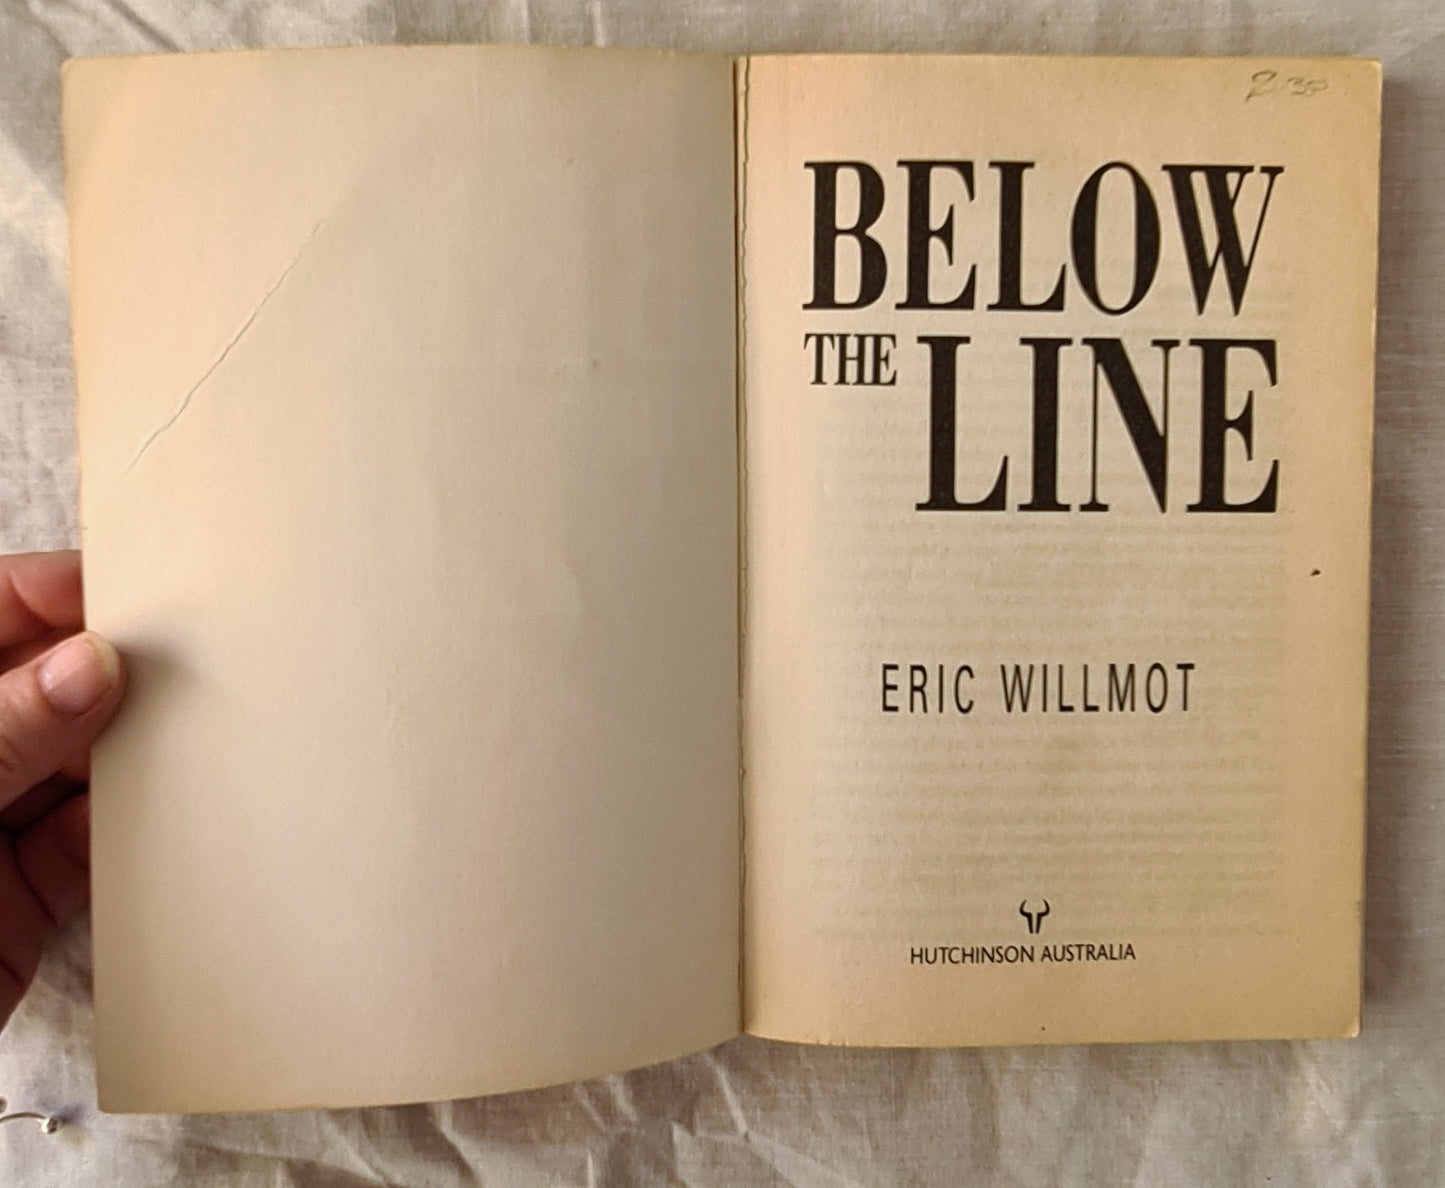 Below the Line by Eric Willmot